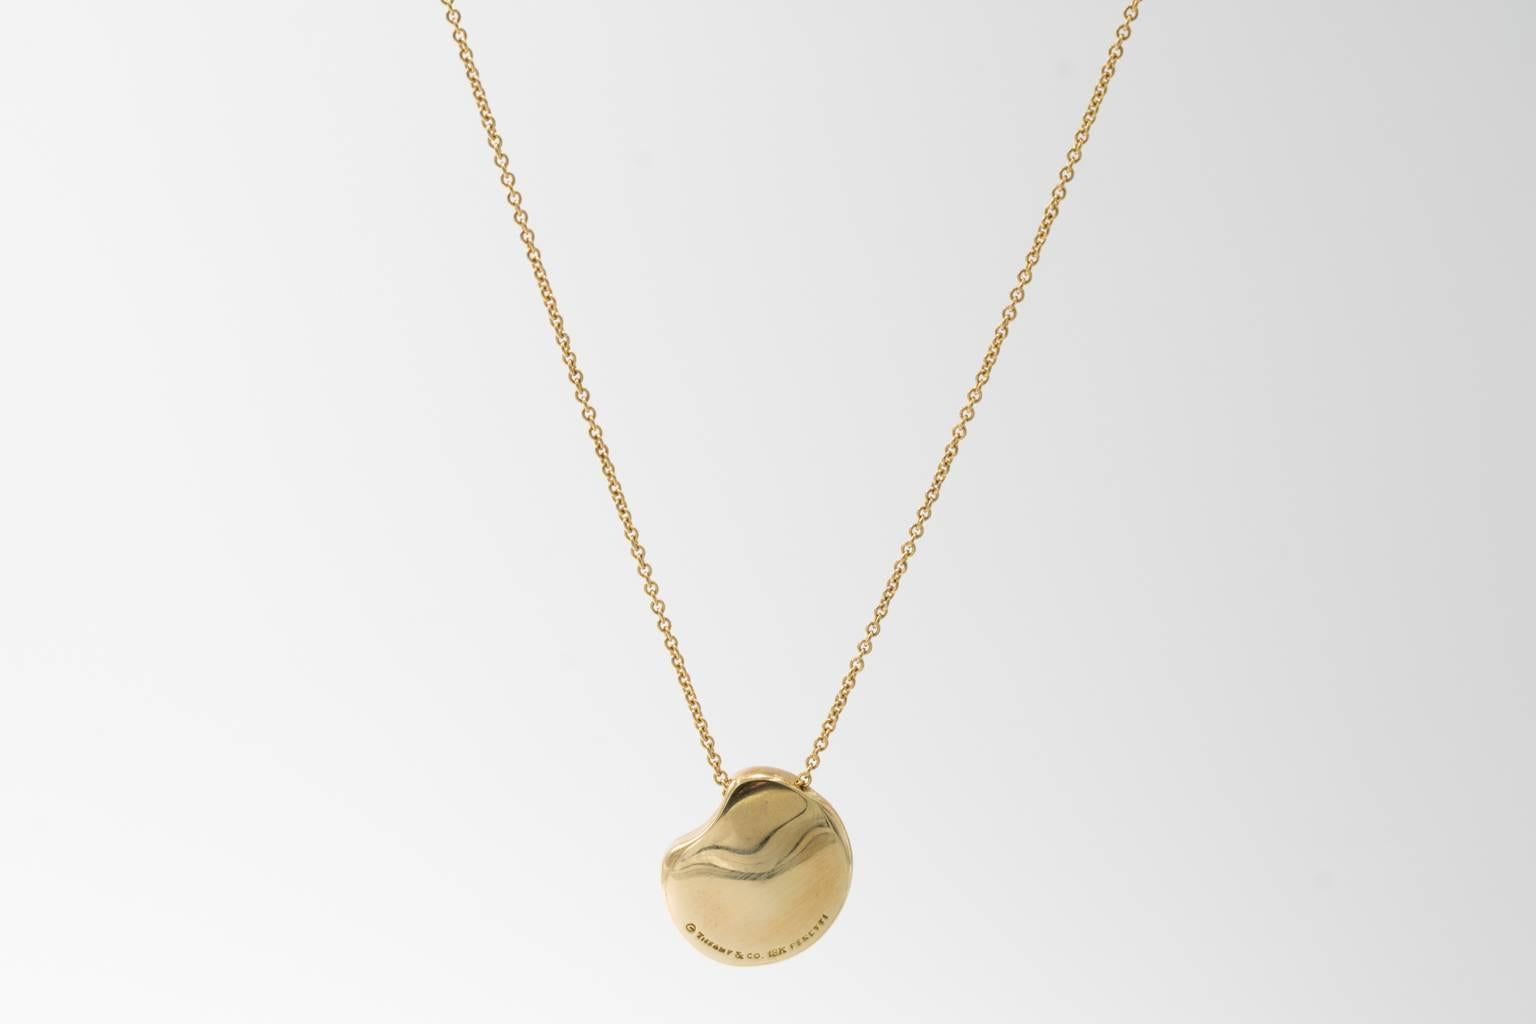 Classic pendant and chain constructed from solid 18 KT yellow gold. Believed to be either cat island isle shell style or bean or broad bean pendant. Substantial yet not too showy. Great for daily wear. Pendant is about 7/8 inches in size, chain is